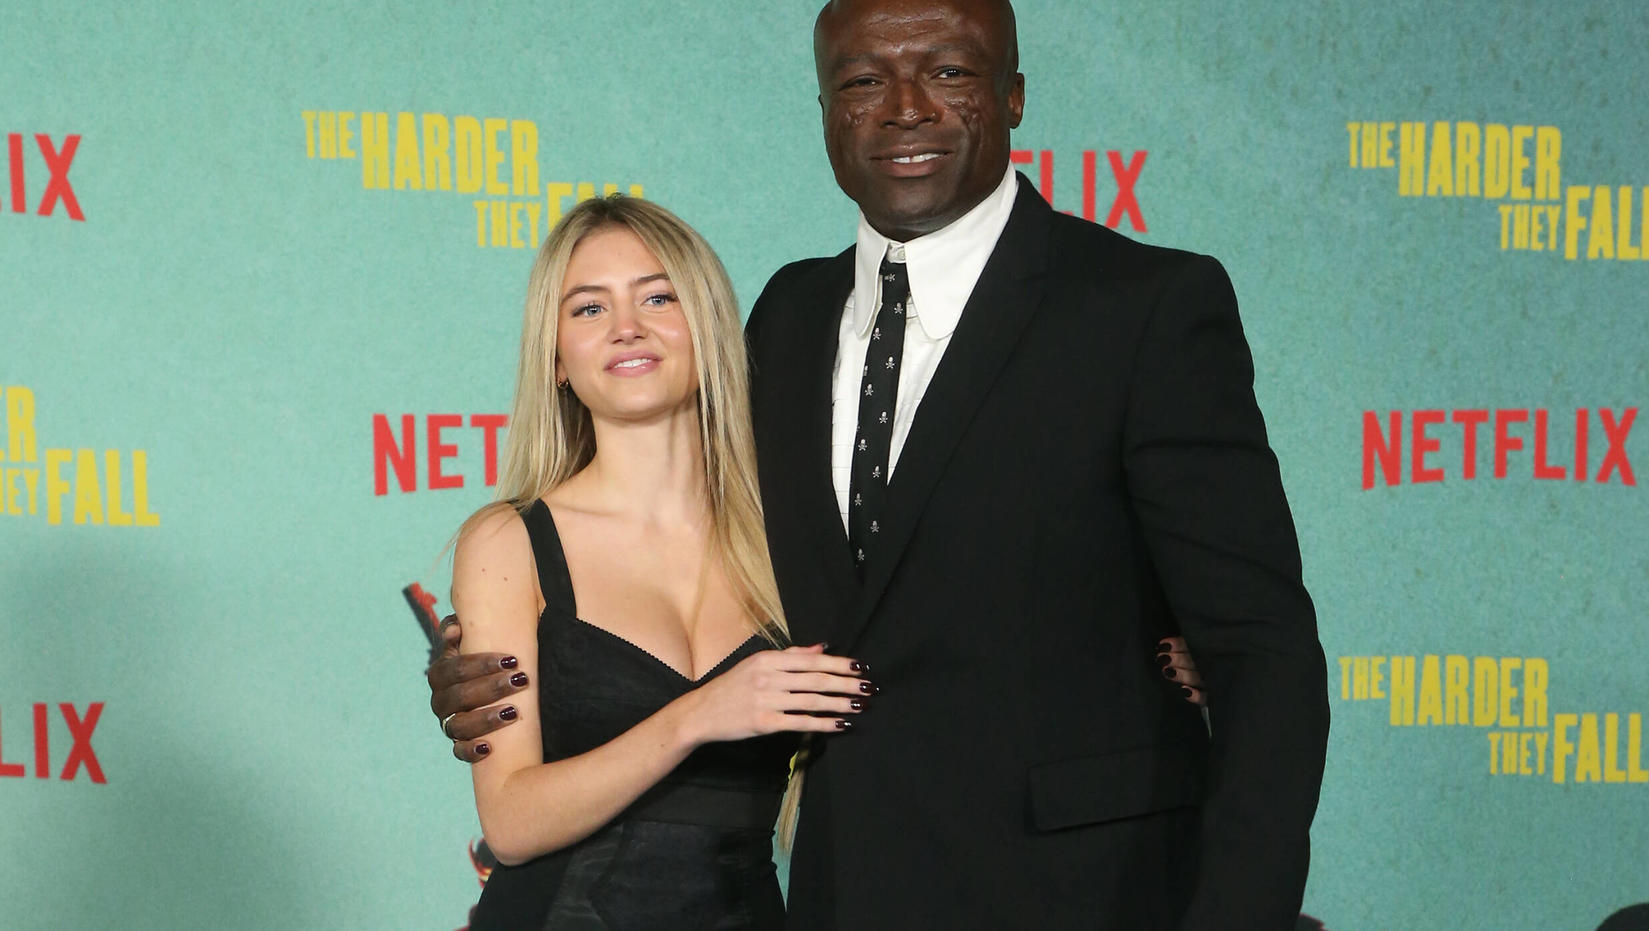  Los Angeles Special Screening Of The Harder They Fall Featuring: Leni Olumi Klum, Seal Where: Los Angeles, California, United States When: 13 Oct 2021 Credit: Faye s Vision/Cover Images PUBLICATIONxNOTxINxUKxFRA Copyright: xx 50765758